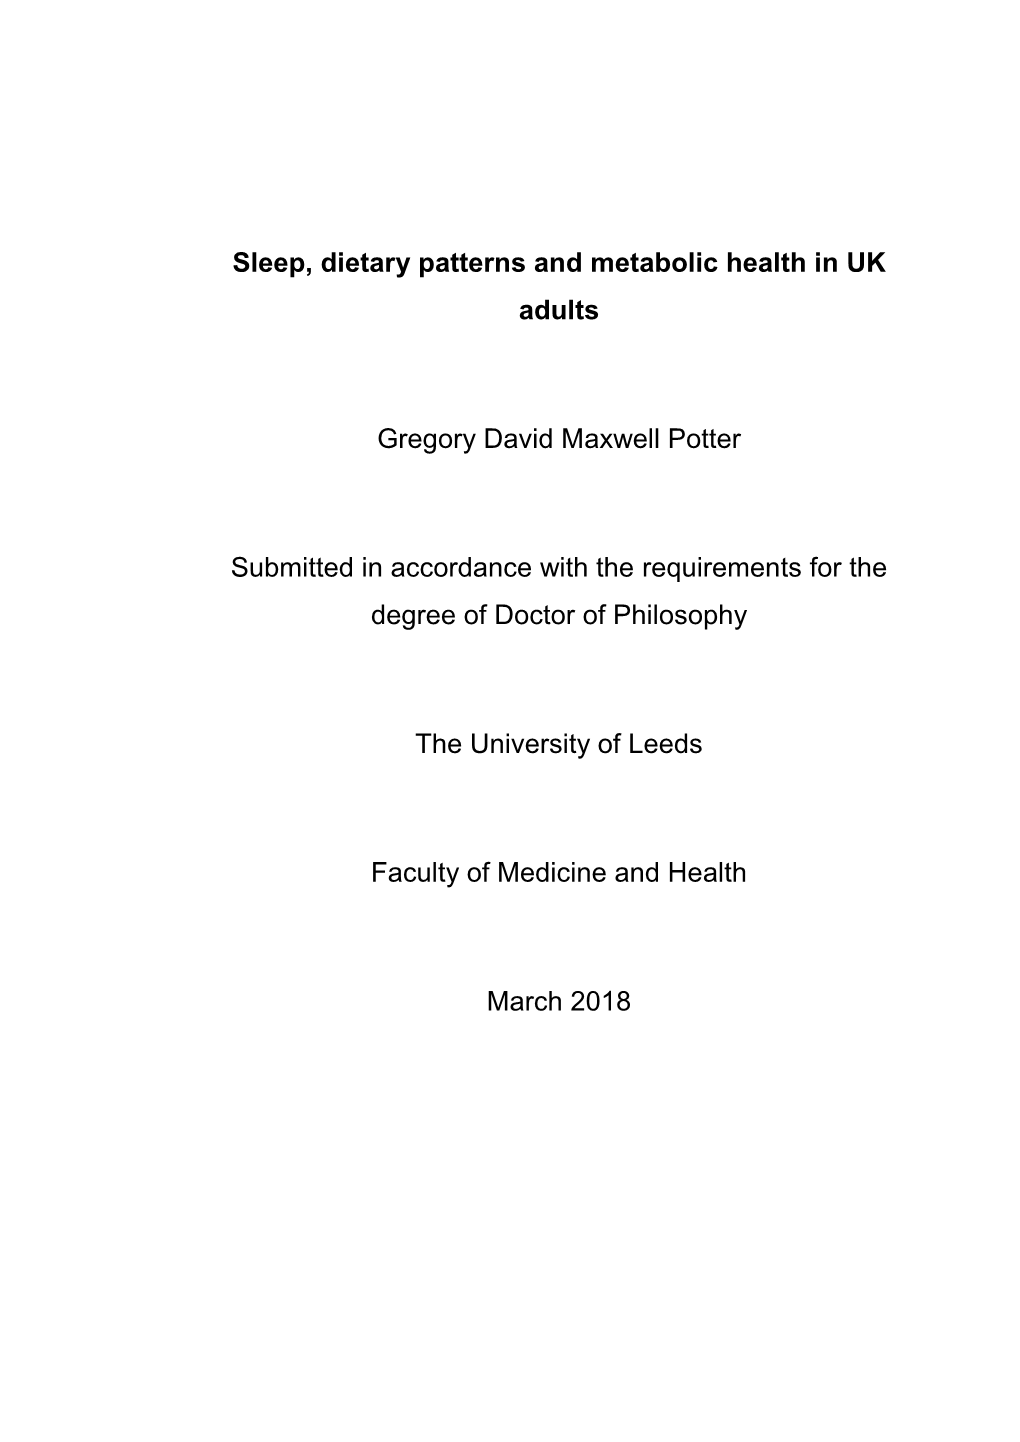 Sleep, Dietary Patterns and Metabolic Health in UK Adults Gregory David